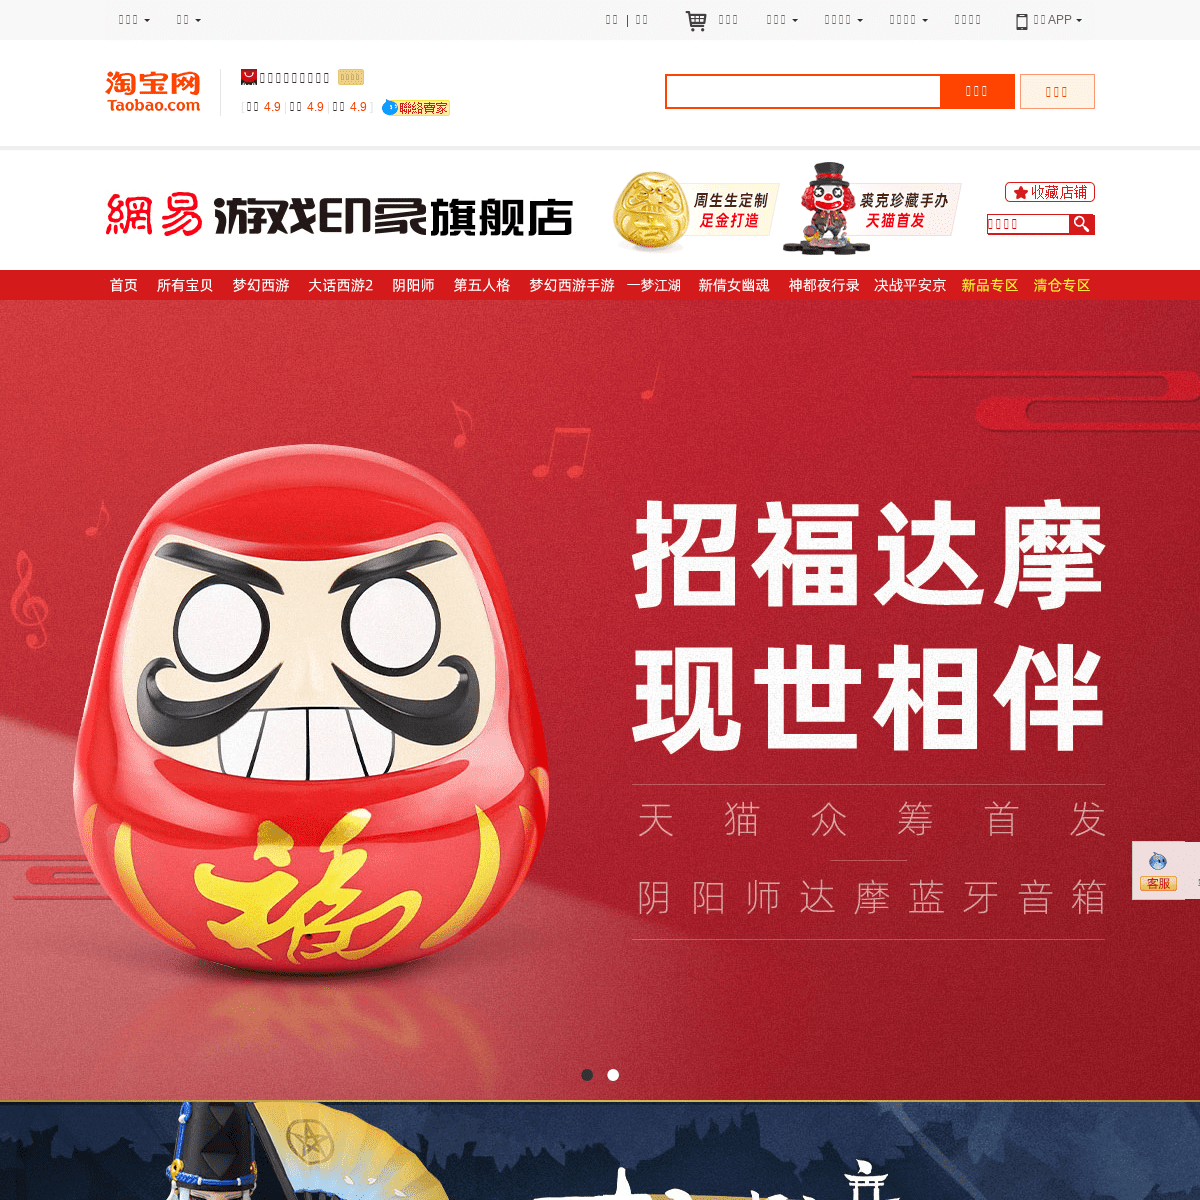 A complete backup of youxiyinxiang.tmall.com